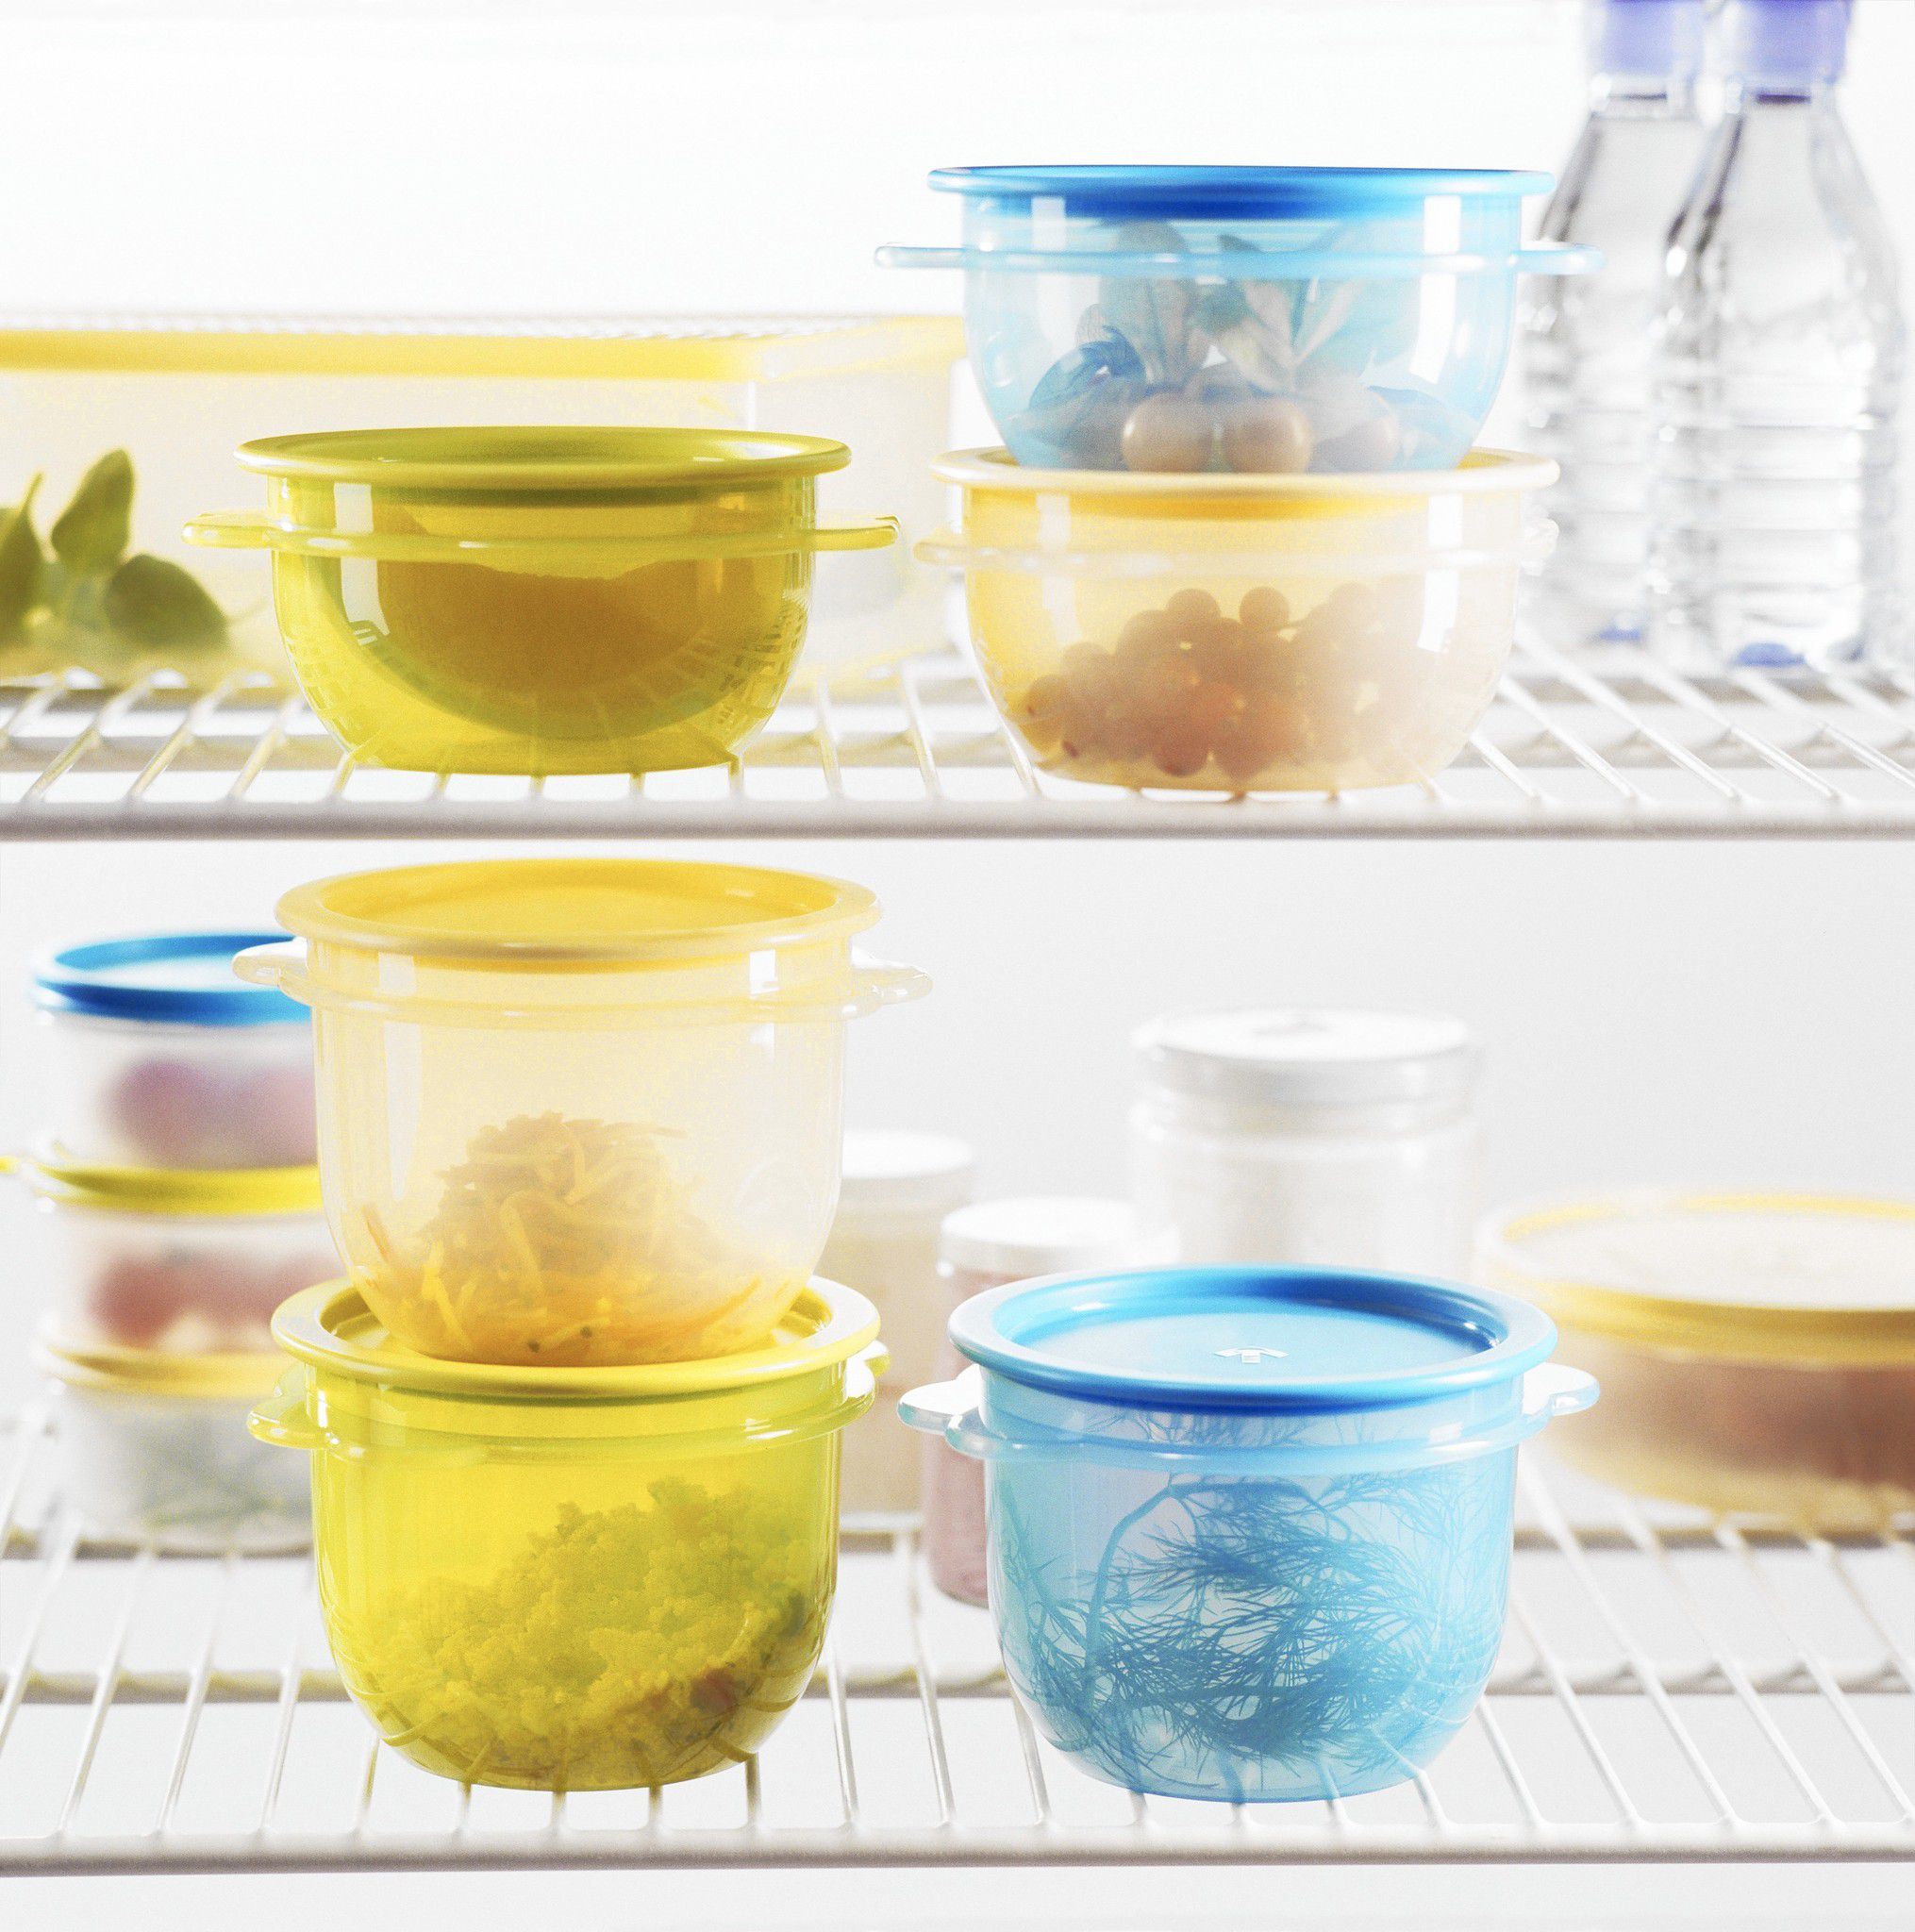 How to choose the right container for storing your leftovers